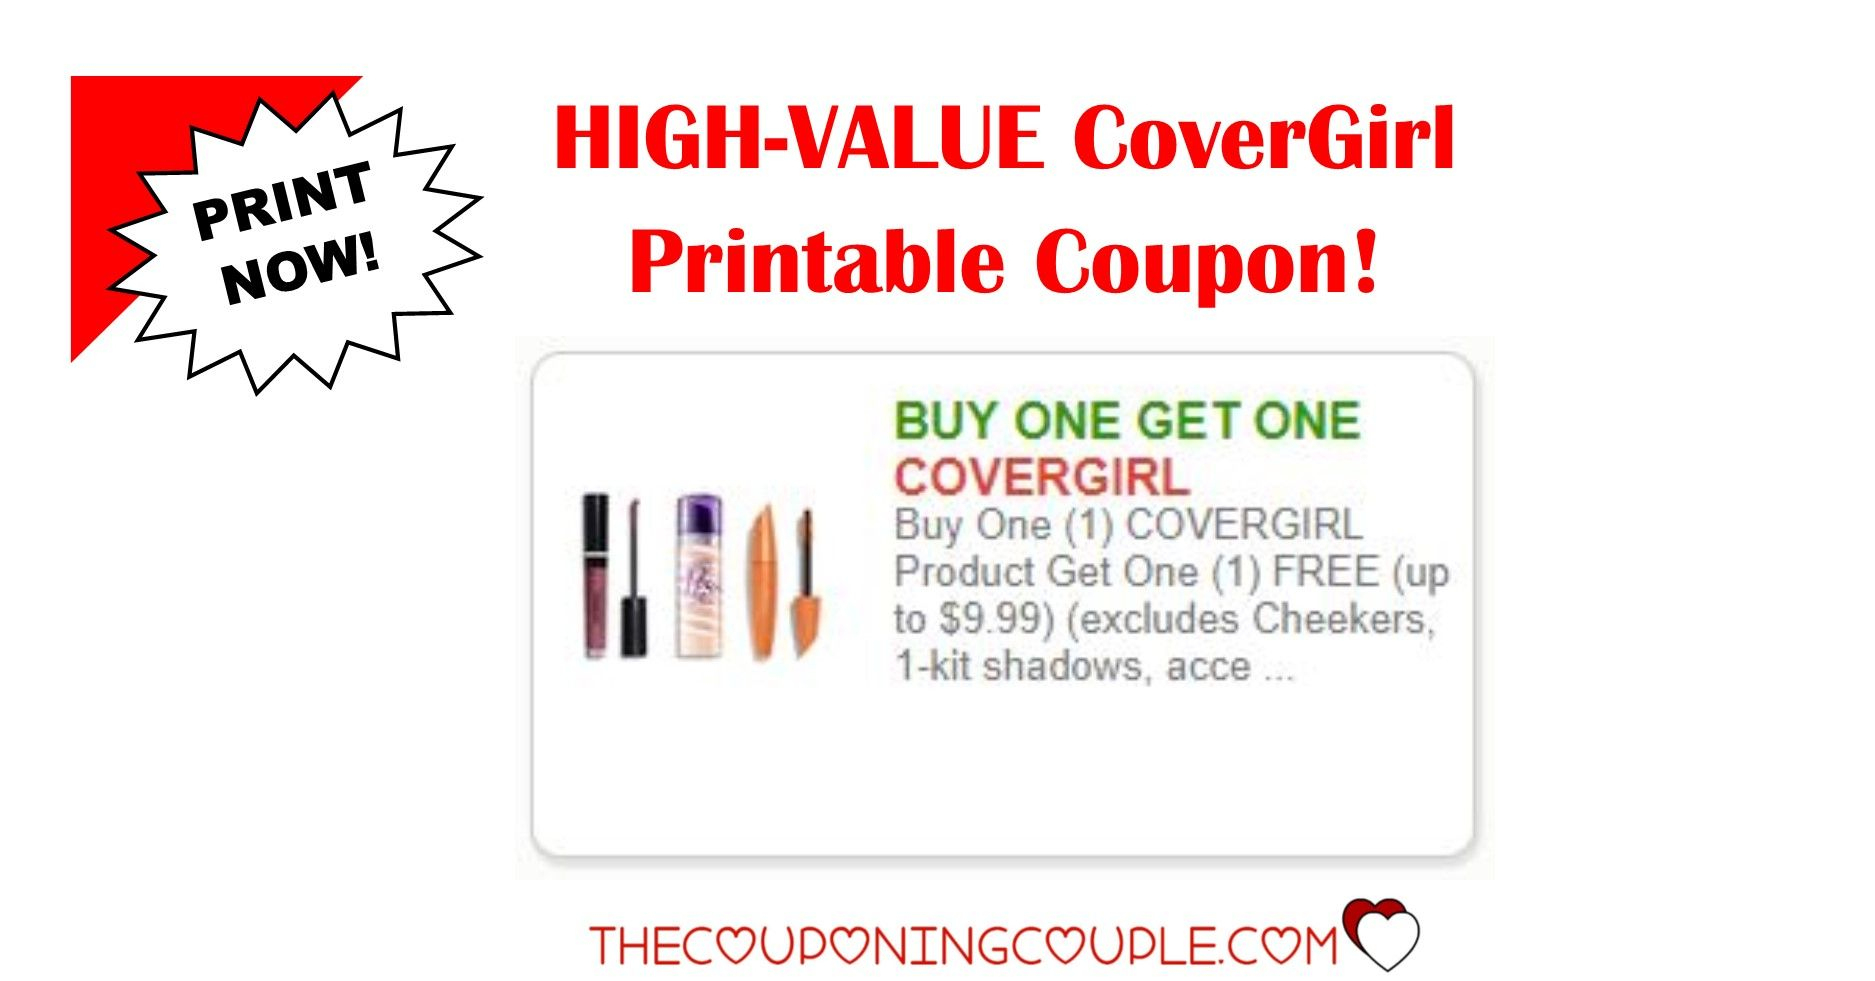 3 Covergirl Printable Coupon ~ Awesome Savings! Print Now! | Store - Free High Value Printable Coupons